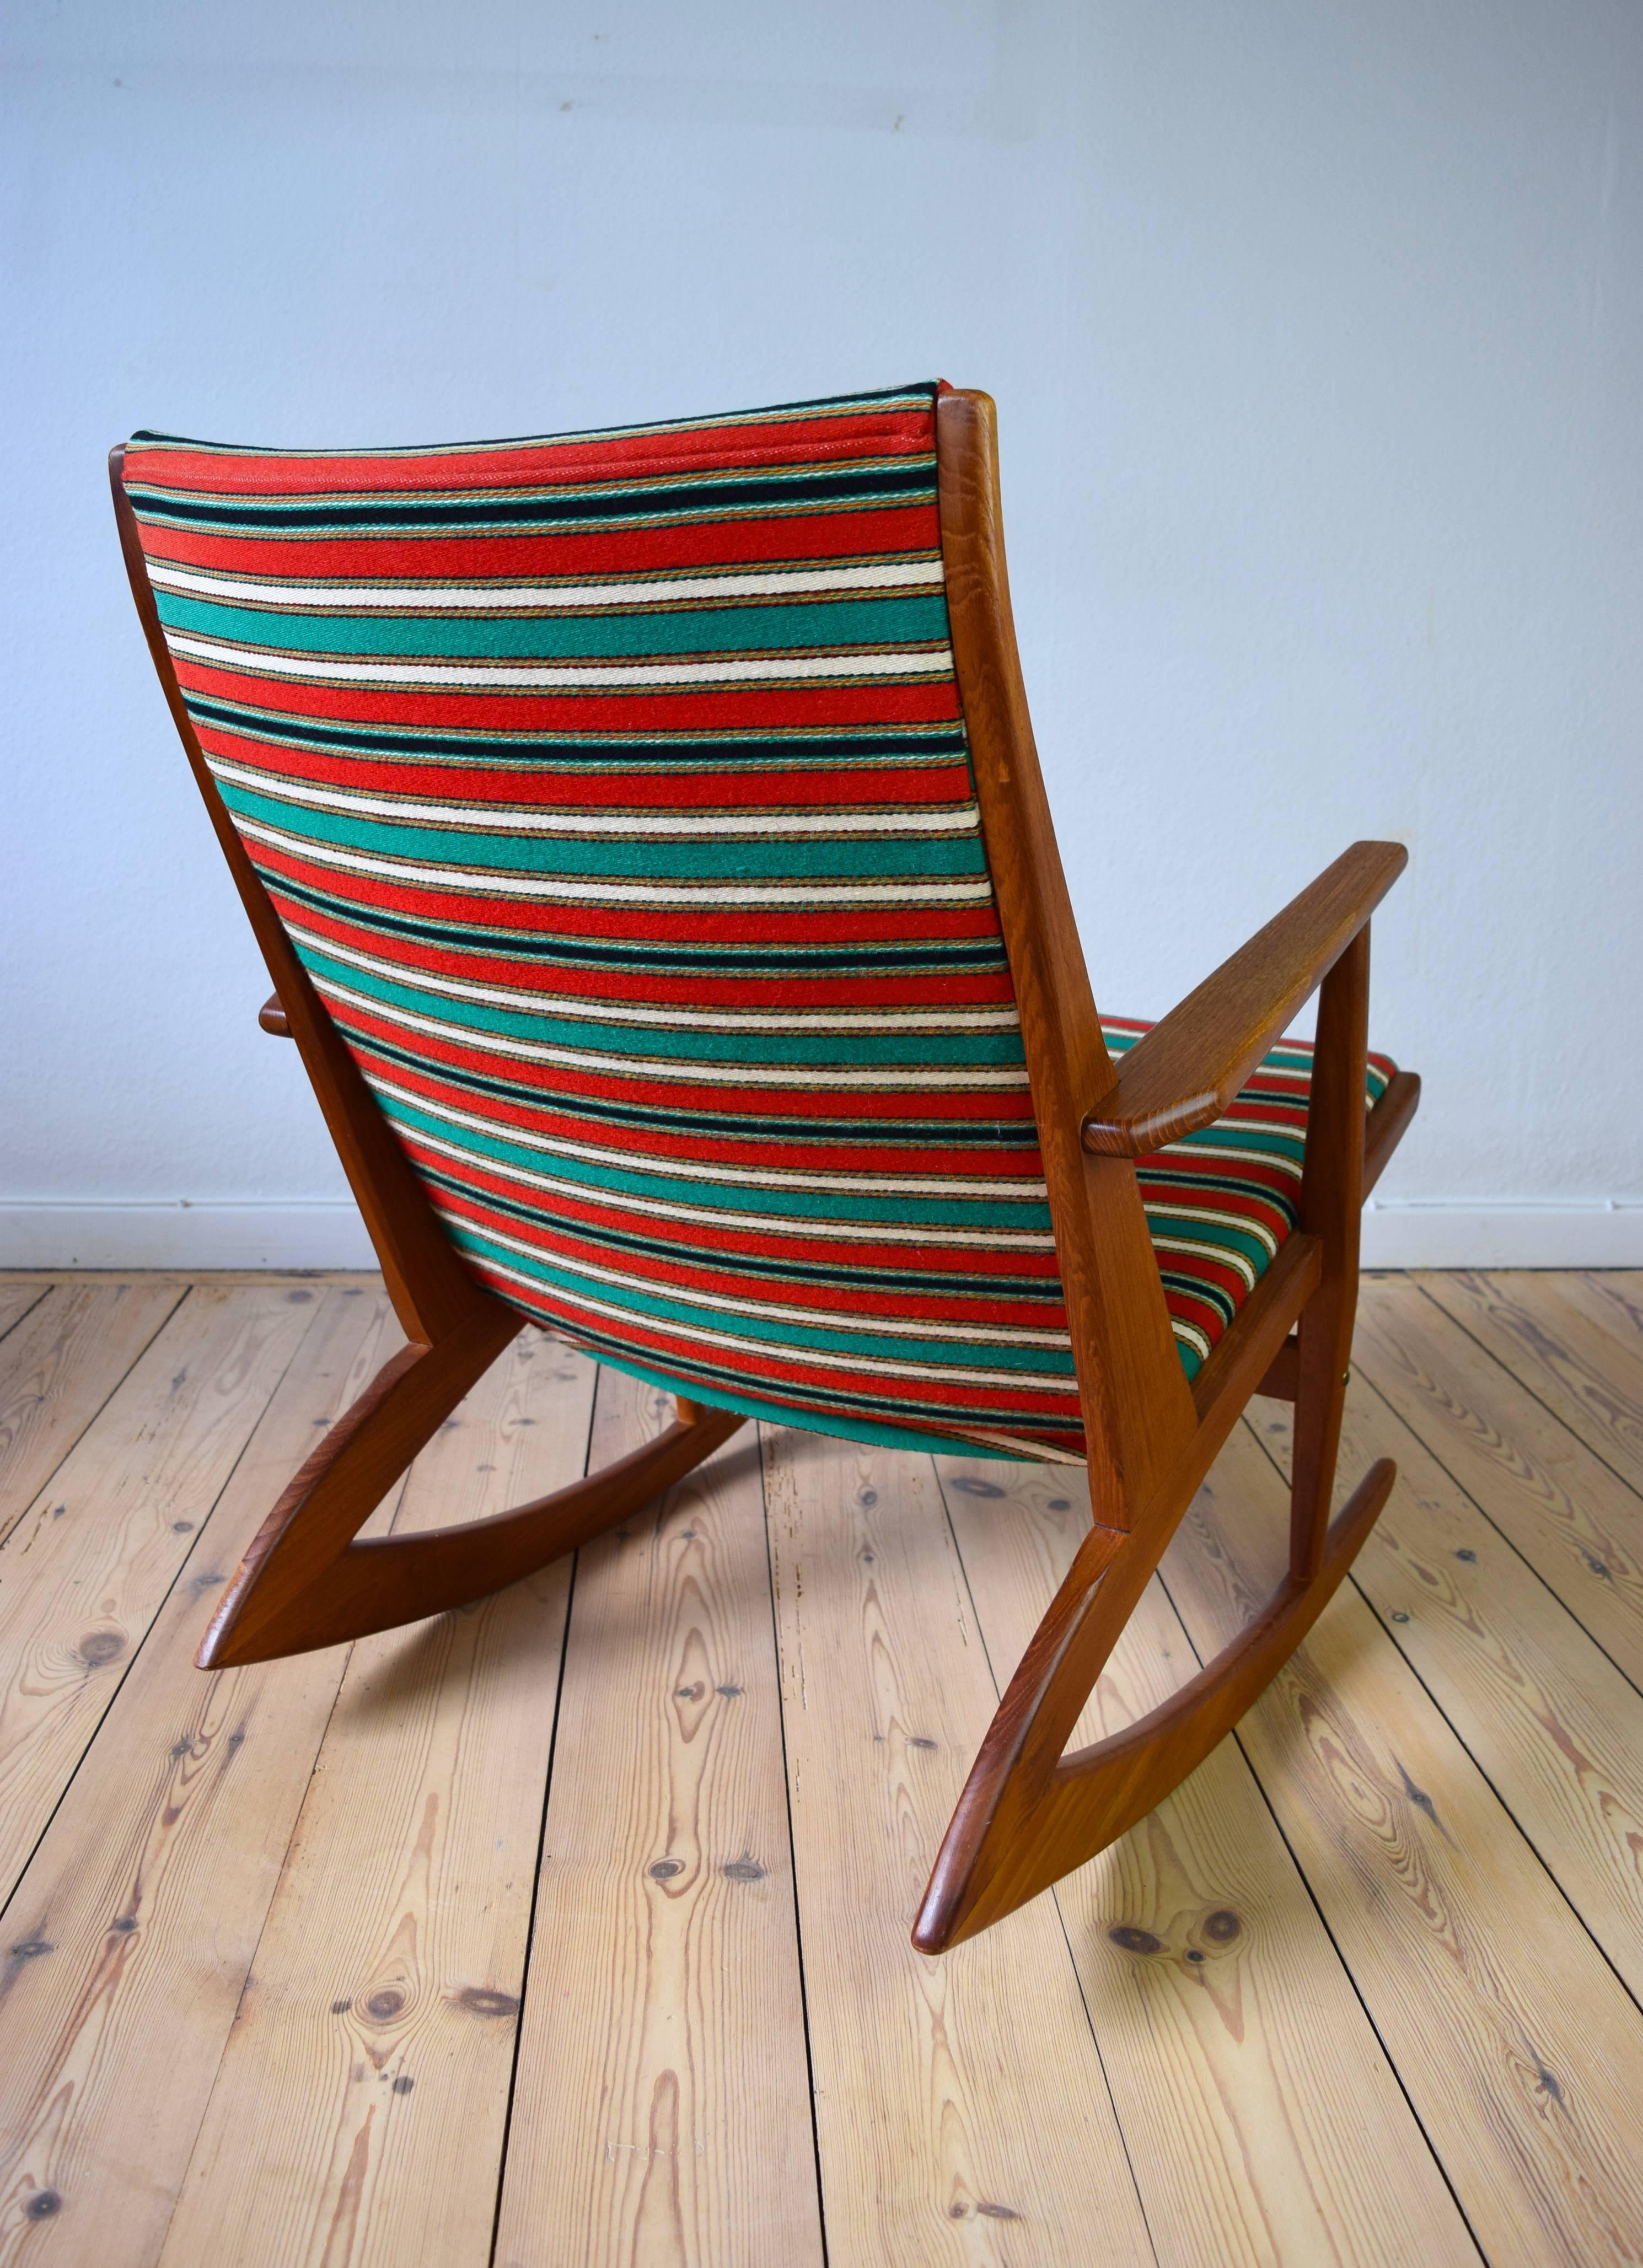 This model 97 Atomic teak rocking chair was designed by Holger Georg Jensen in 1958 and was produced by Kubus in Denmark. The piece features its original red striped fabric and is in a very good vintage condition with minimal wear.